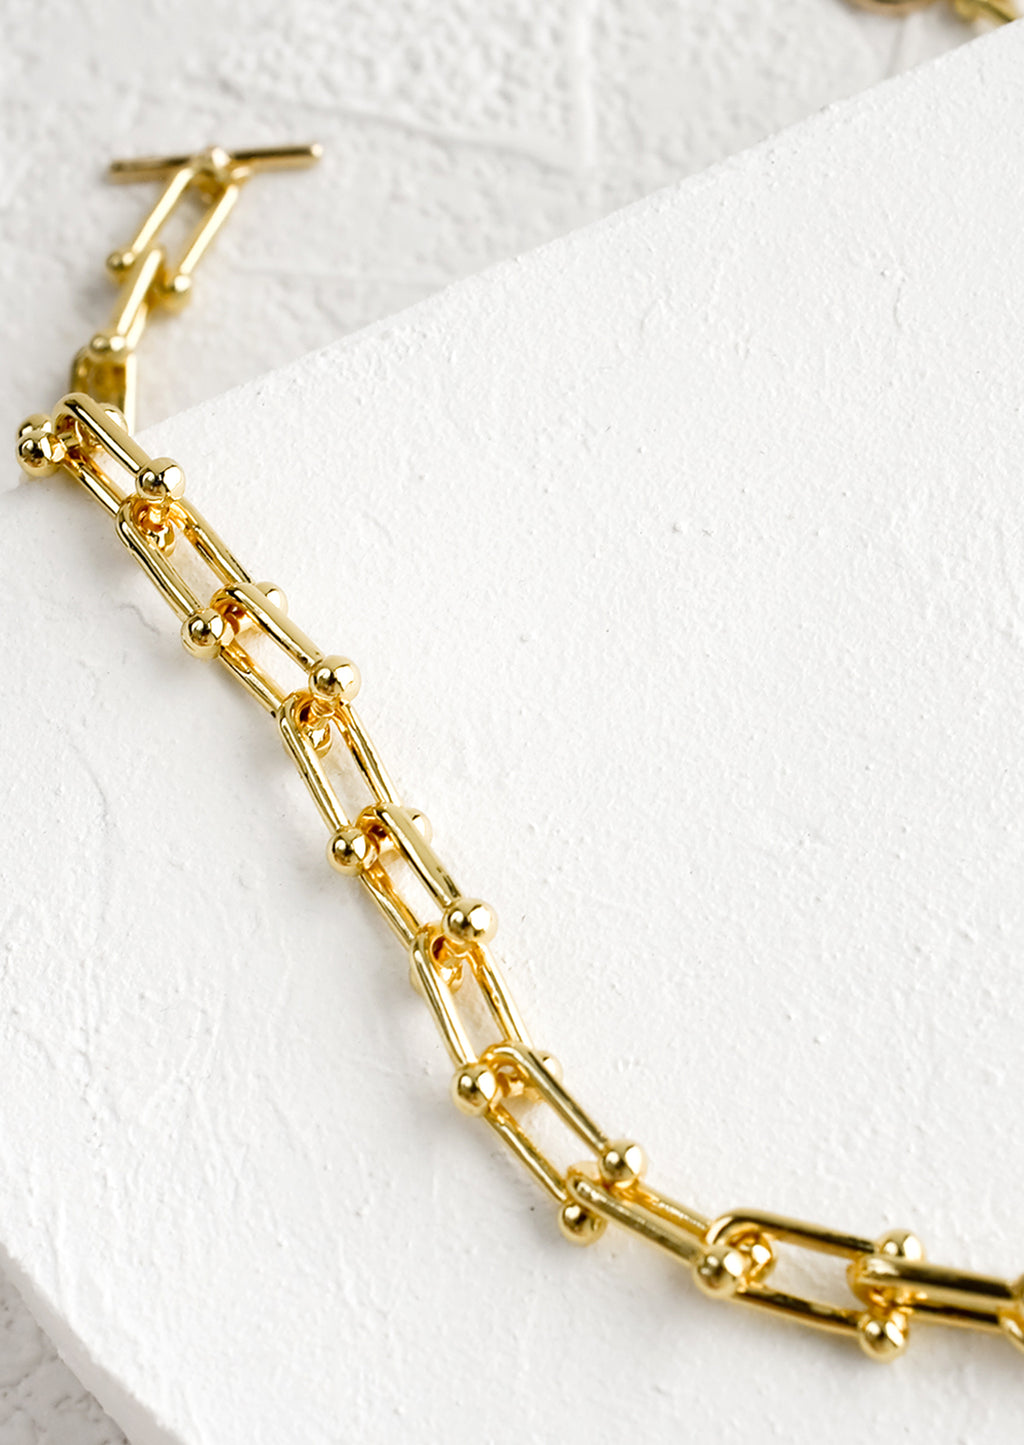 2: A chunky chainlink necklace in gold with toggle closure.